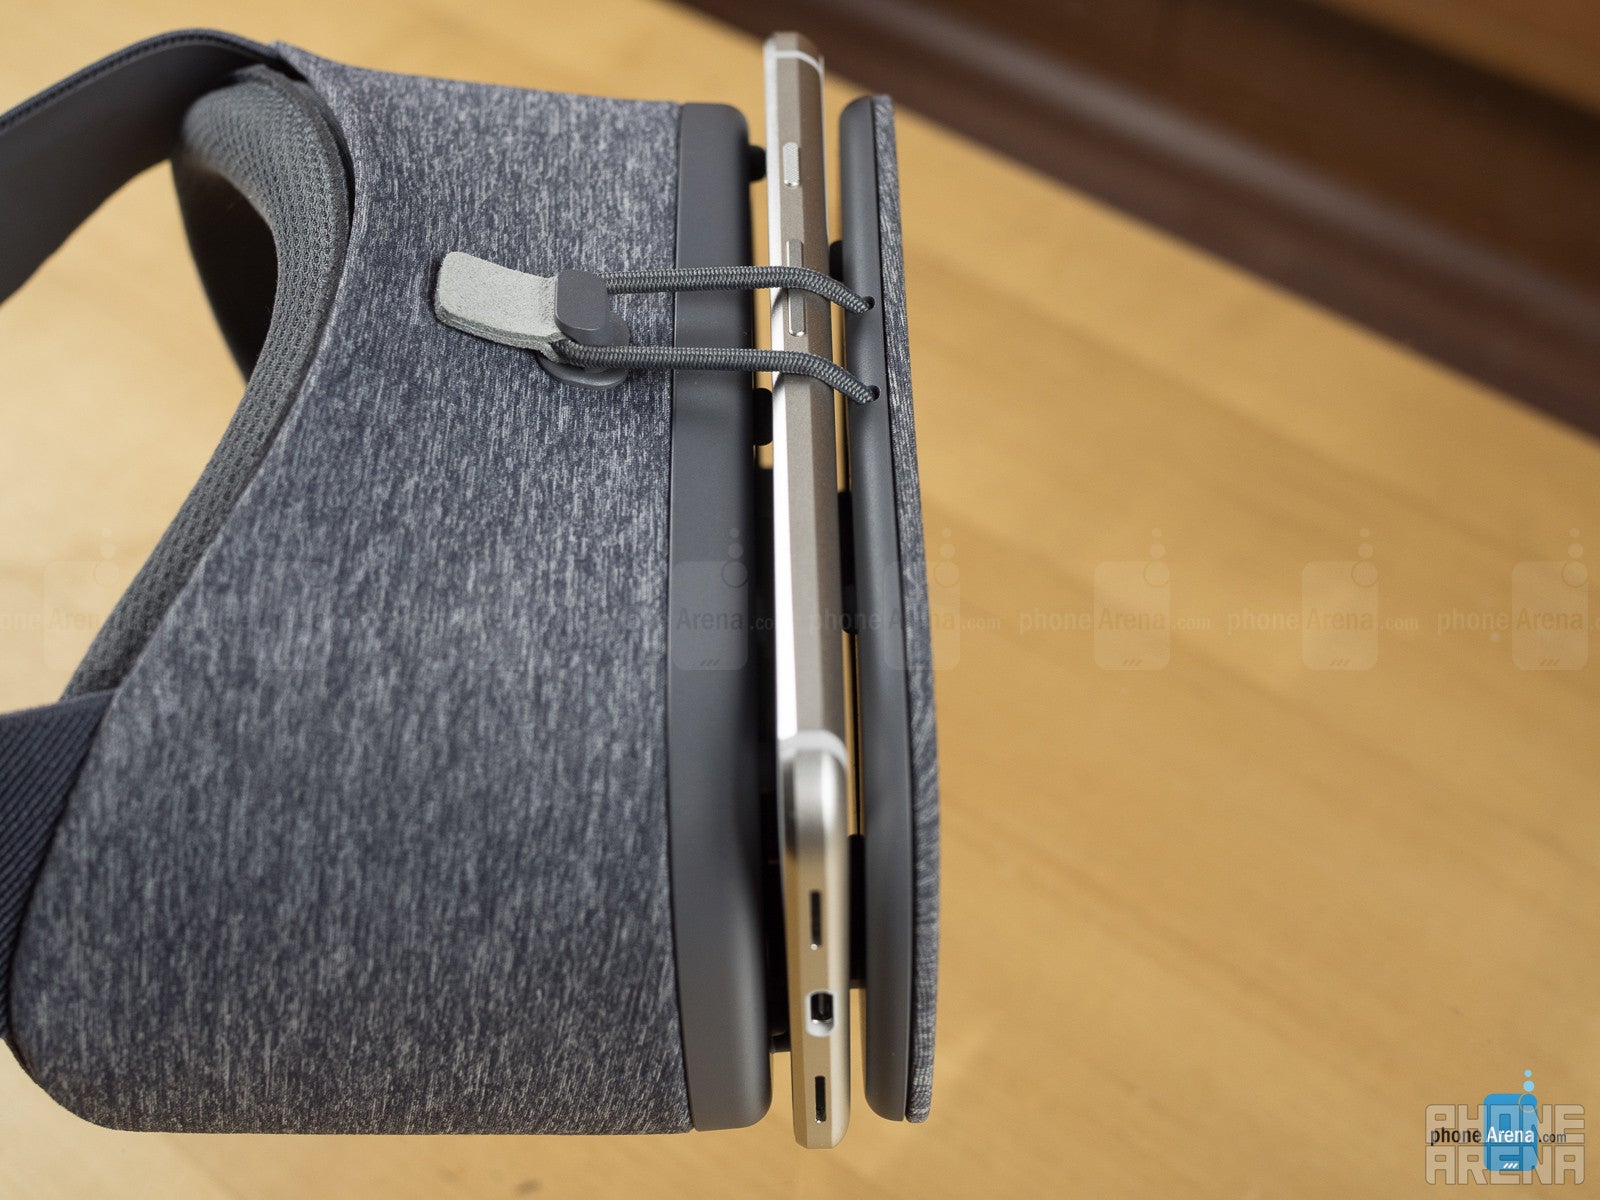 Side illumination can sneak in - Google Daydream View VR headset Review